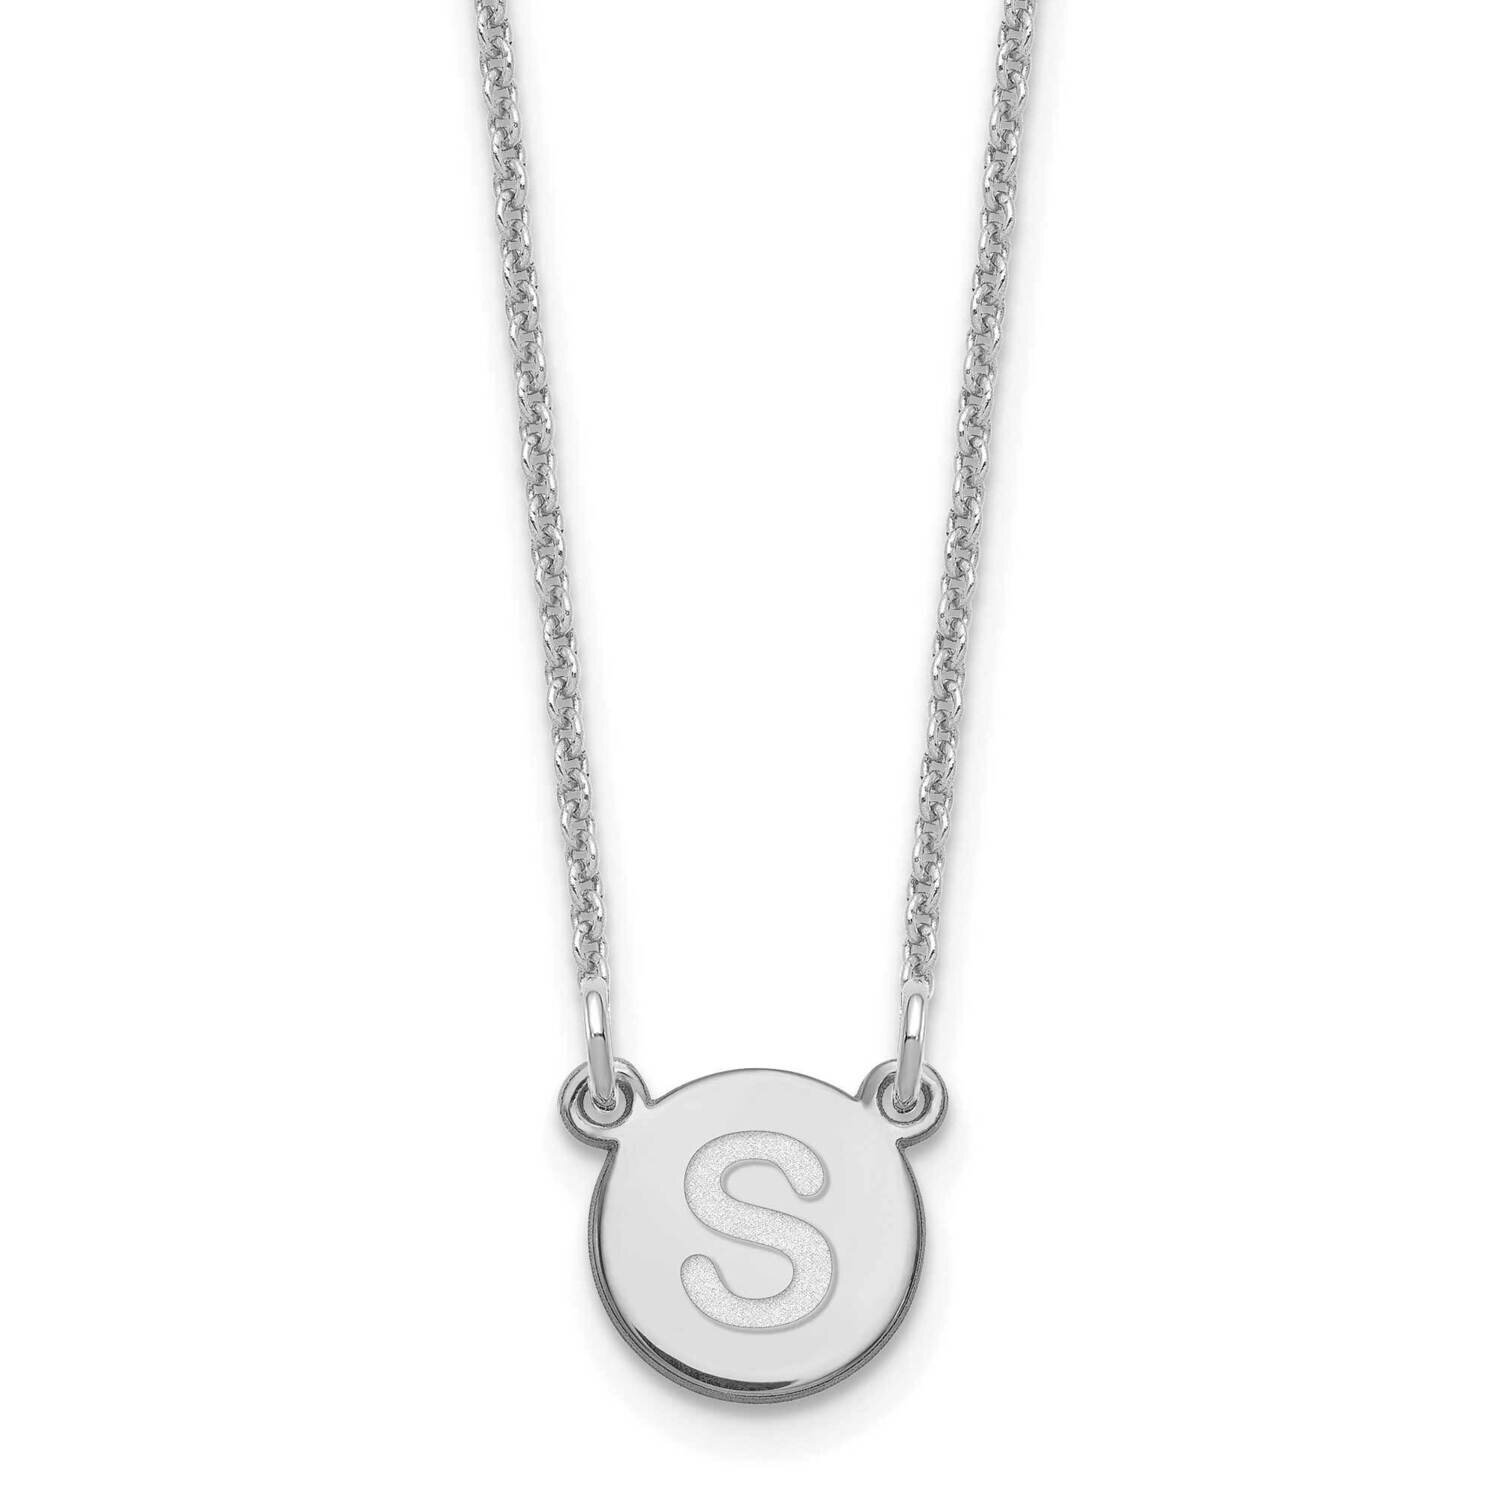 Tiny Circle Block Initial Letter S Necklace 14k White Gold XNA722W/S